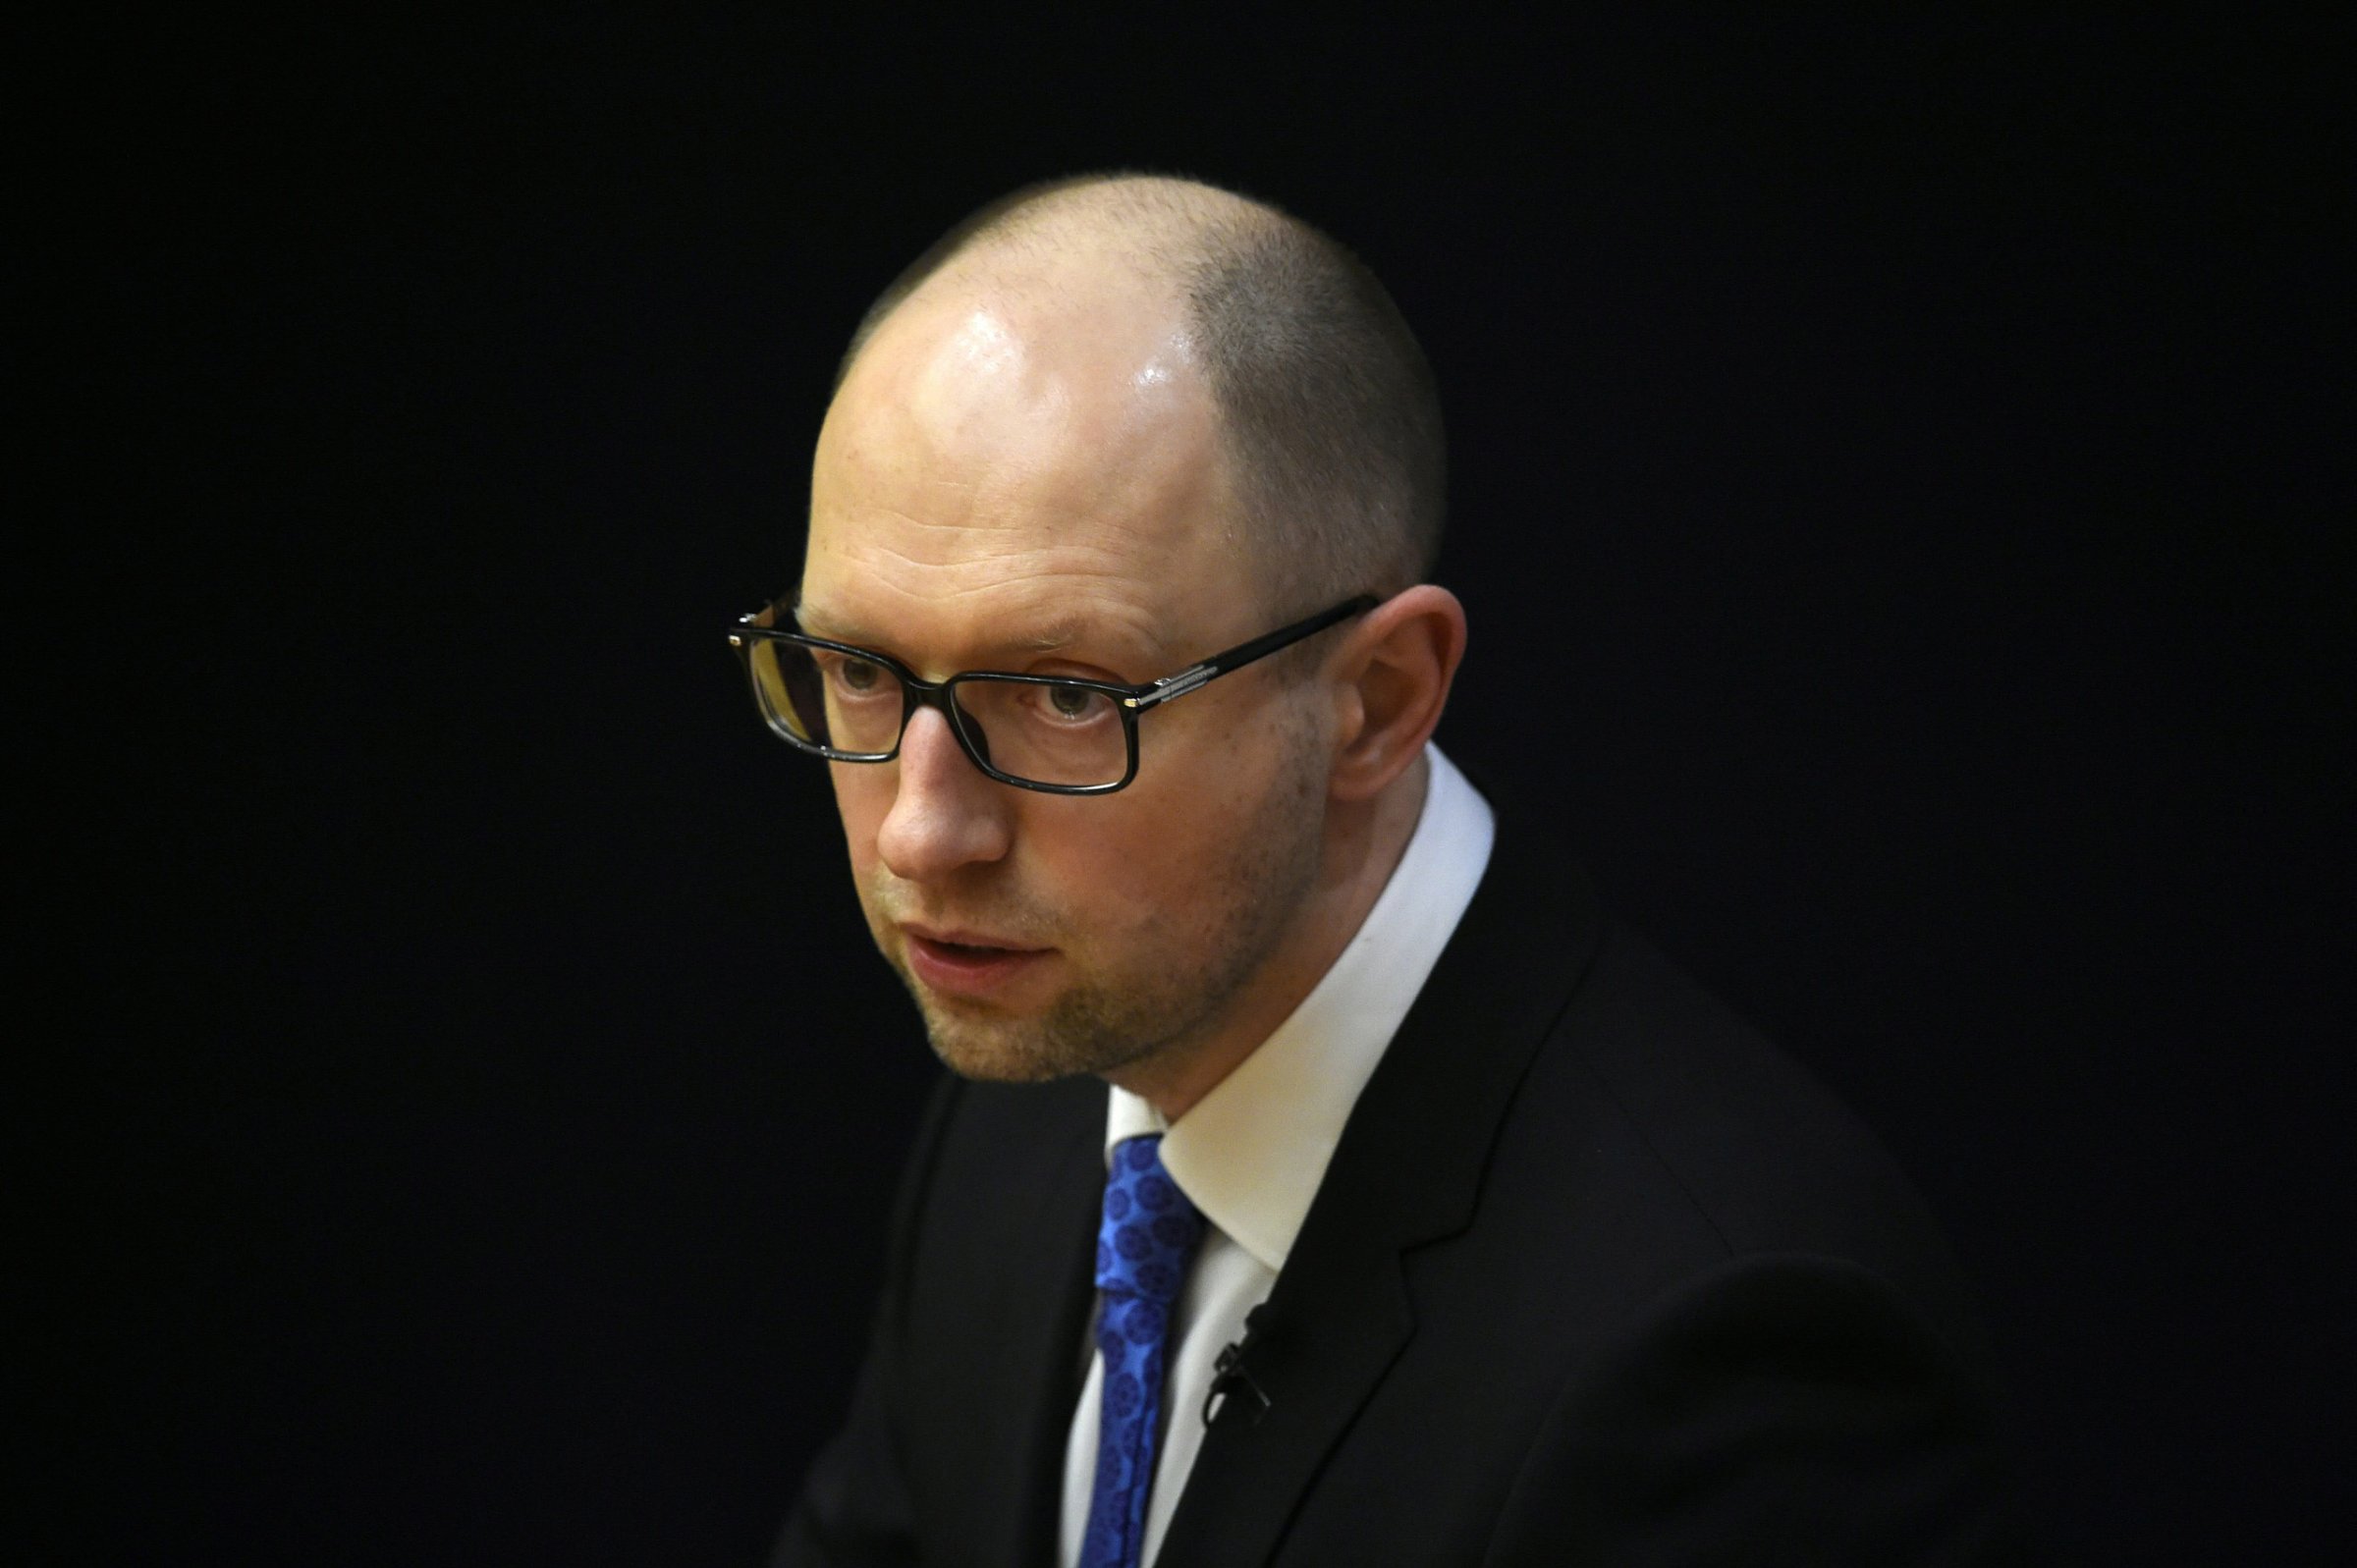 (FILES) This file photo taken on April 1, 2015 shows Ukrainian Prime Minister Arseniy Yatsenyuk delivering a speech at the "Europa-Forum" series of events organised by the Konrad-Adenauer-Stiftung foundation in Berlin. Ukraine's Prime Minister Arseniy Yatsenyuk said in a televised address on April 10, 2016 that he has decided to resign, less than two months after surviving a no-confidence vote in parliament. "I decided to step down from the post of prime minister of Ukraine," he said in a message aired by Ukrainian channels, Interfax news agency reported. / AFP PHOTO / TOBIAS SCHWARZTOBIAS SCHWARZ/AFP/Getty Images